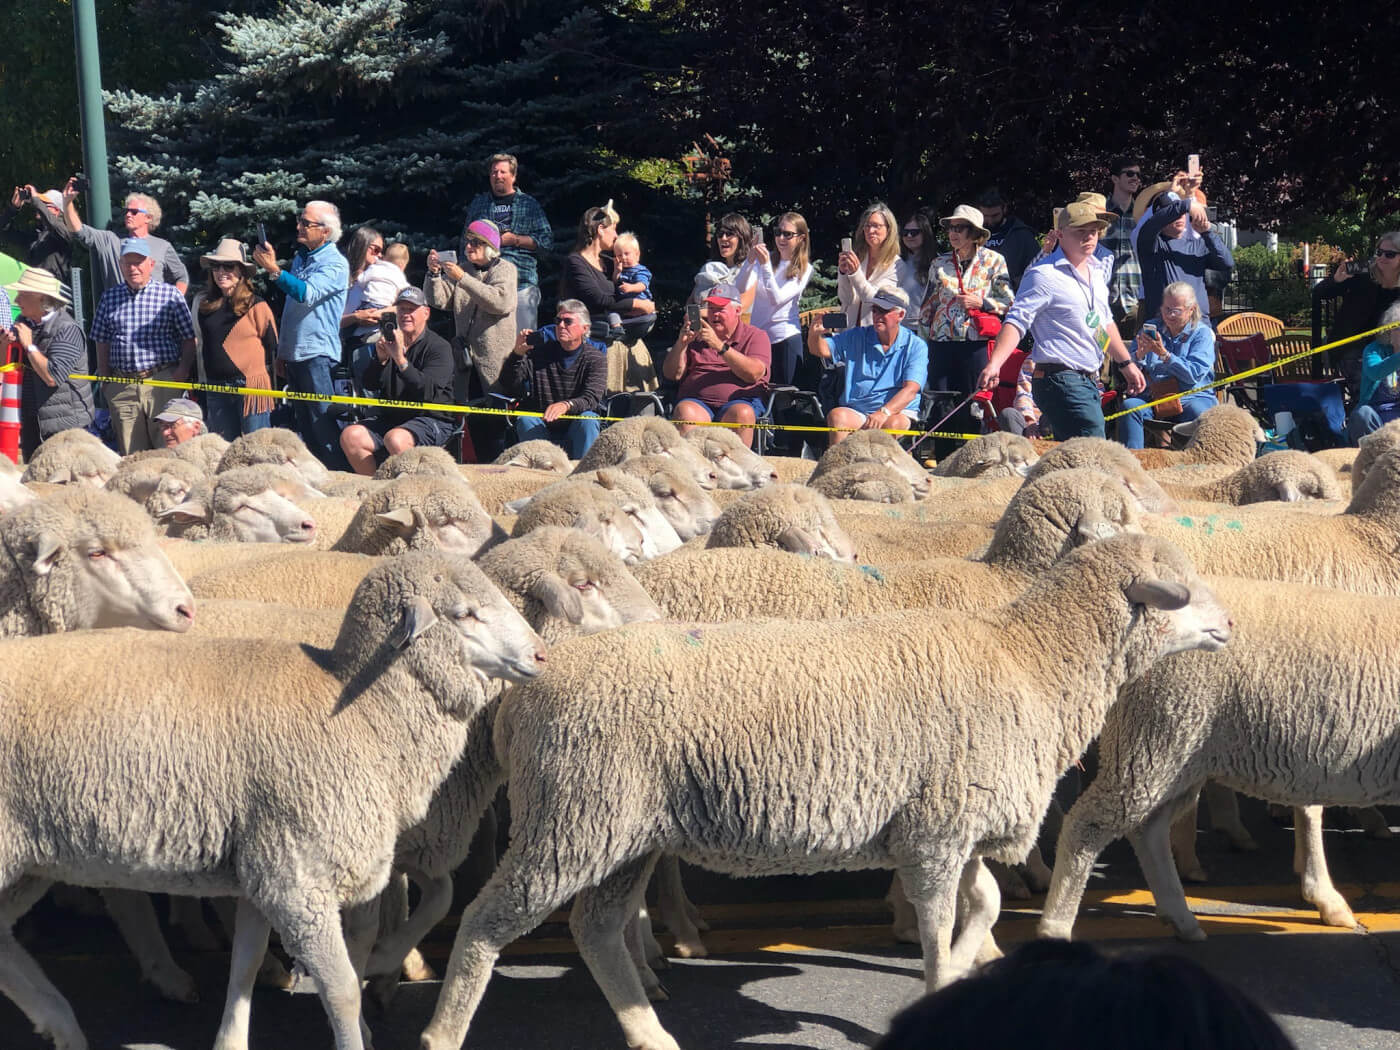 Trailing of the Sheep Festival